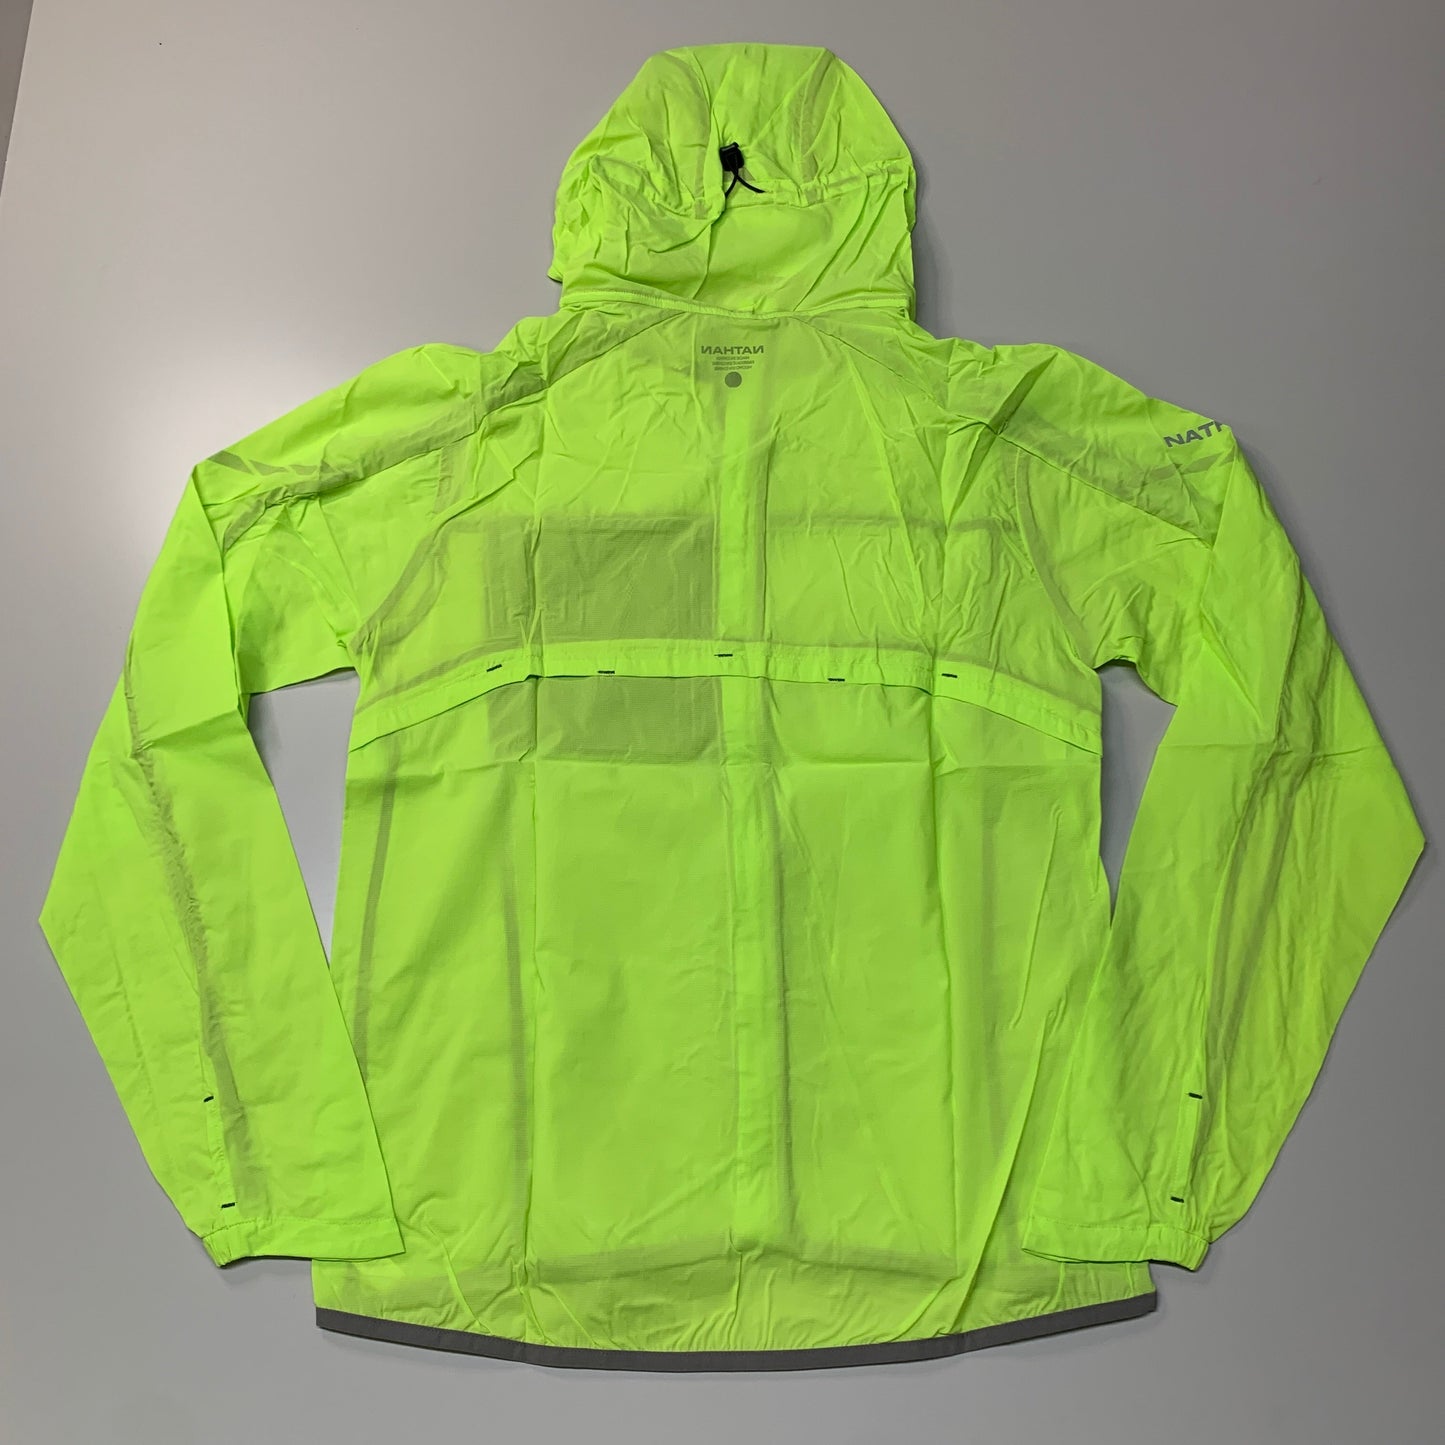 NATHAN Stealth Jacket W/ Hood Women's Acid Lime Size Small NS90060-50061-S